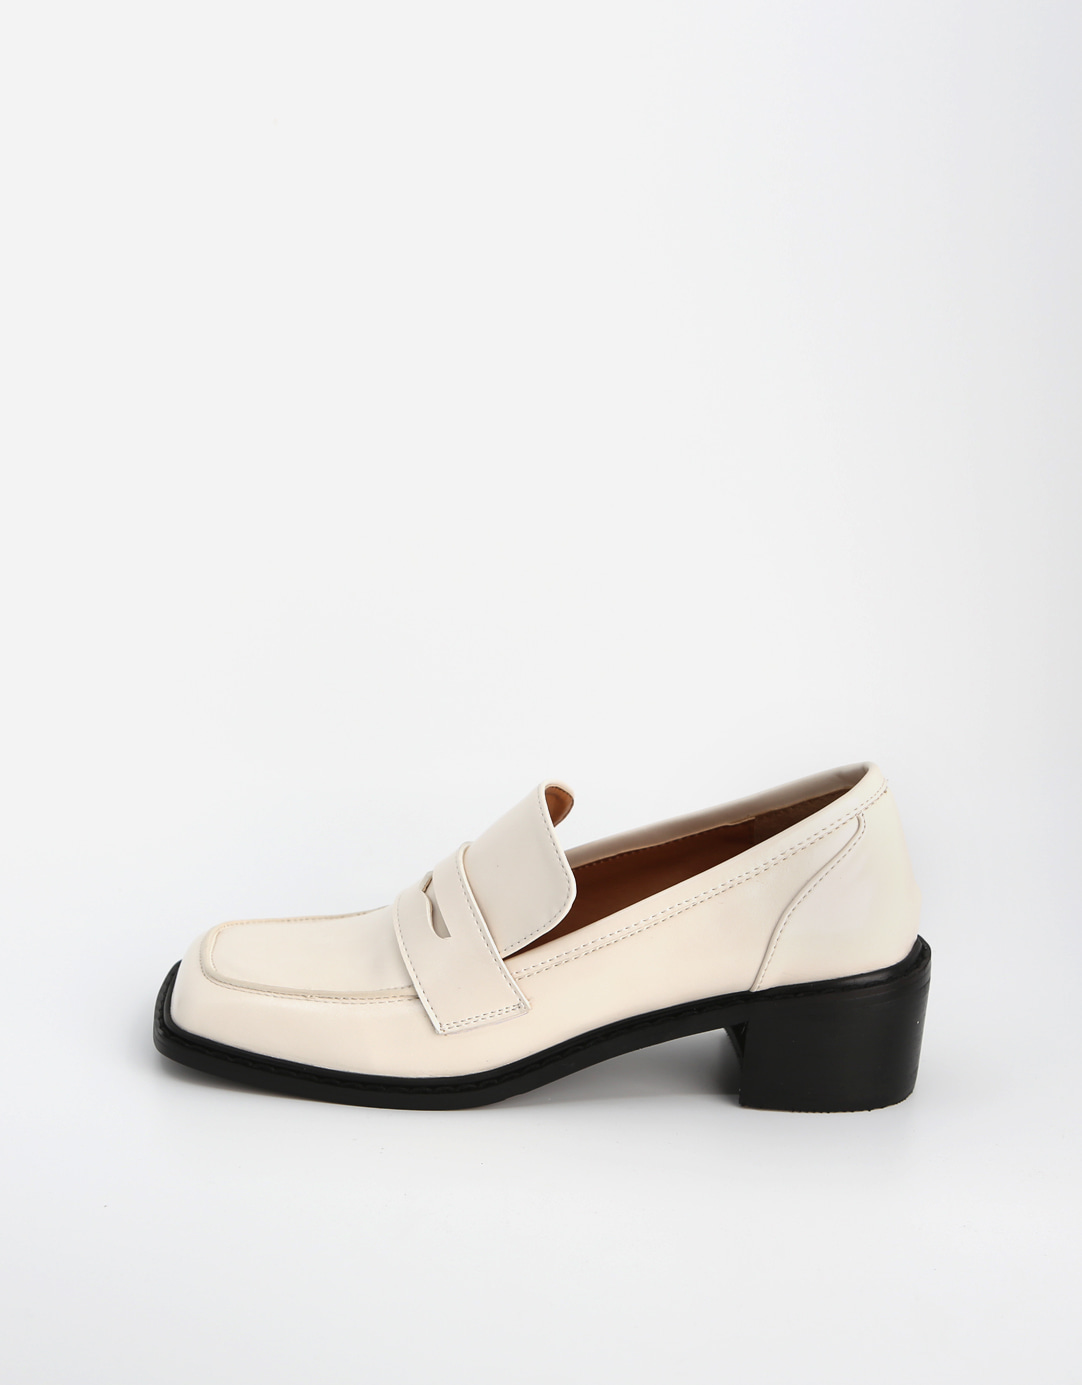 GLOSSY SQUARE LOAFER